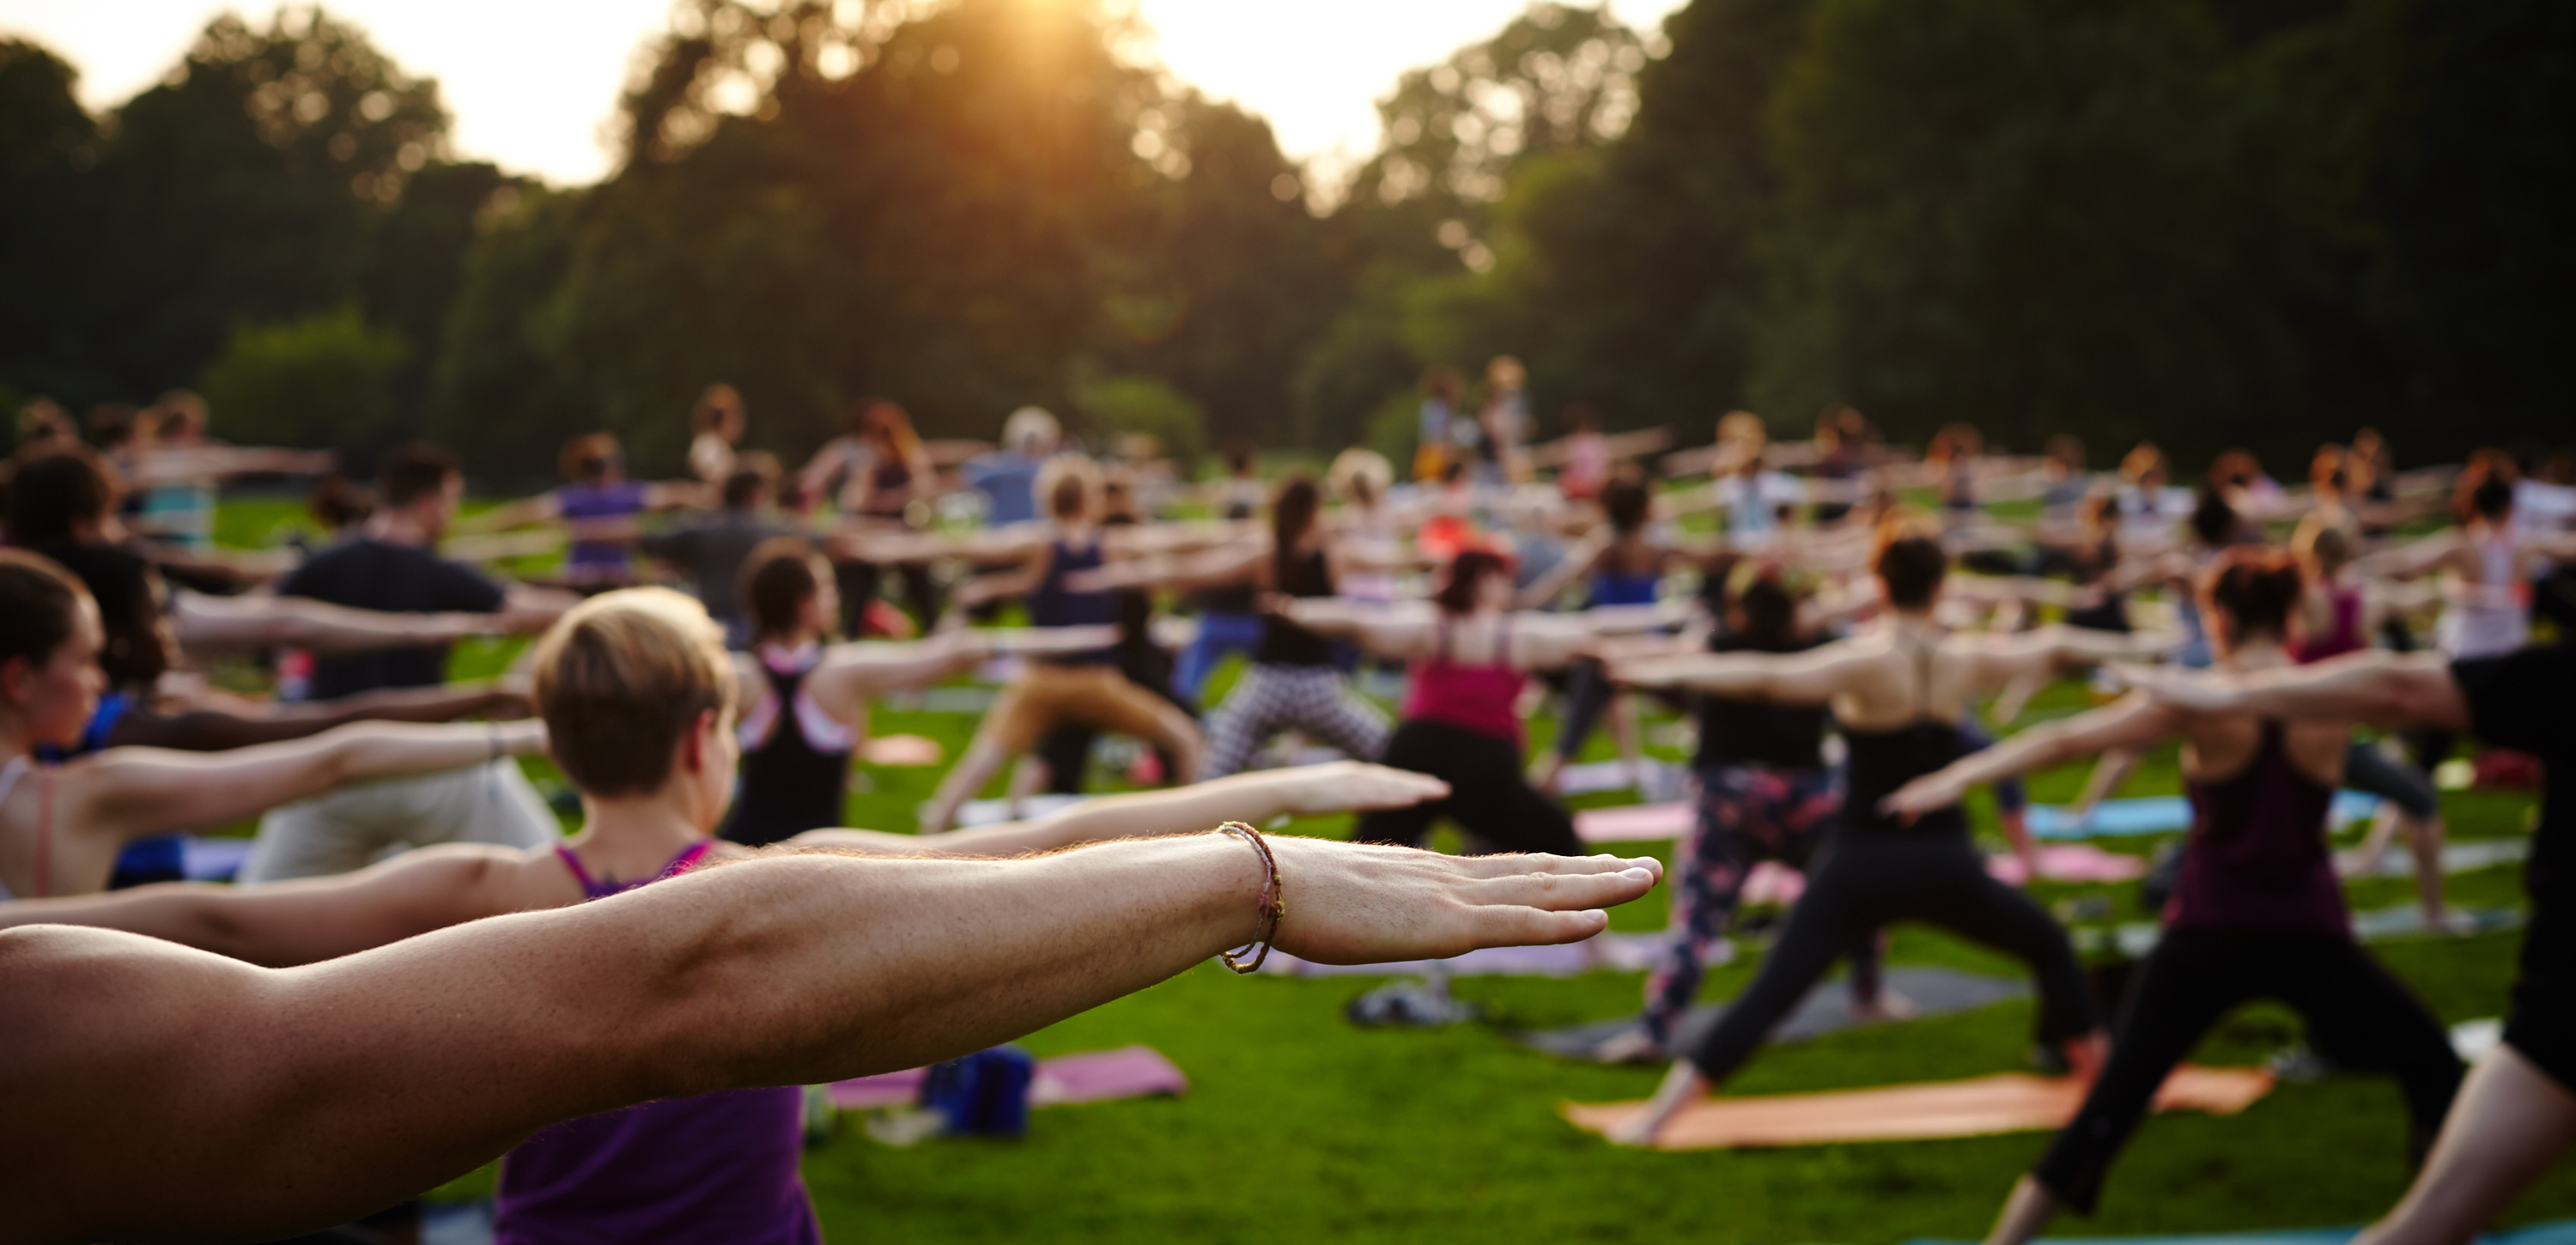 Yoga Class Outside  How to Teach Yoga Outdoors [GUIDE]